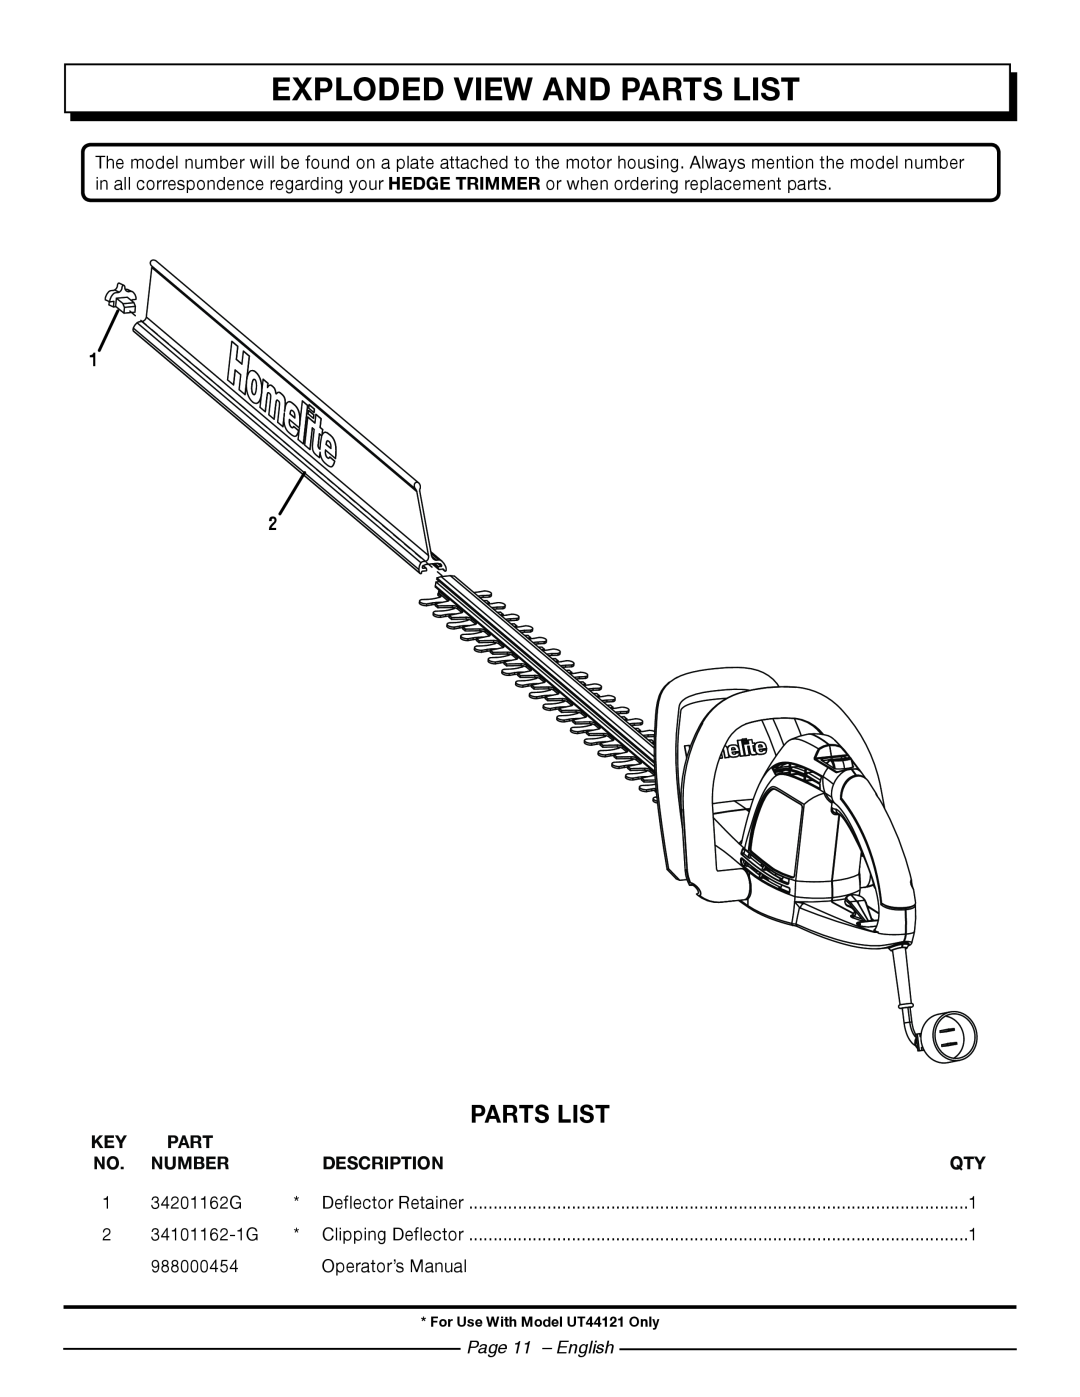 Homelite Exploded View And Parts List, Number, Description, Page 11 - English, For Use With Model UT44121 Only 